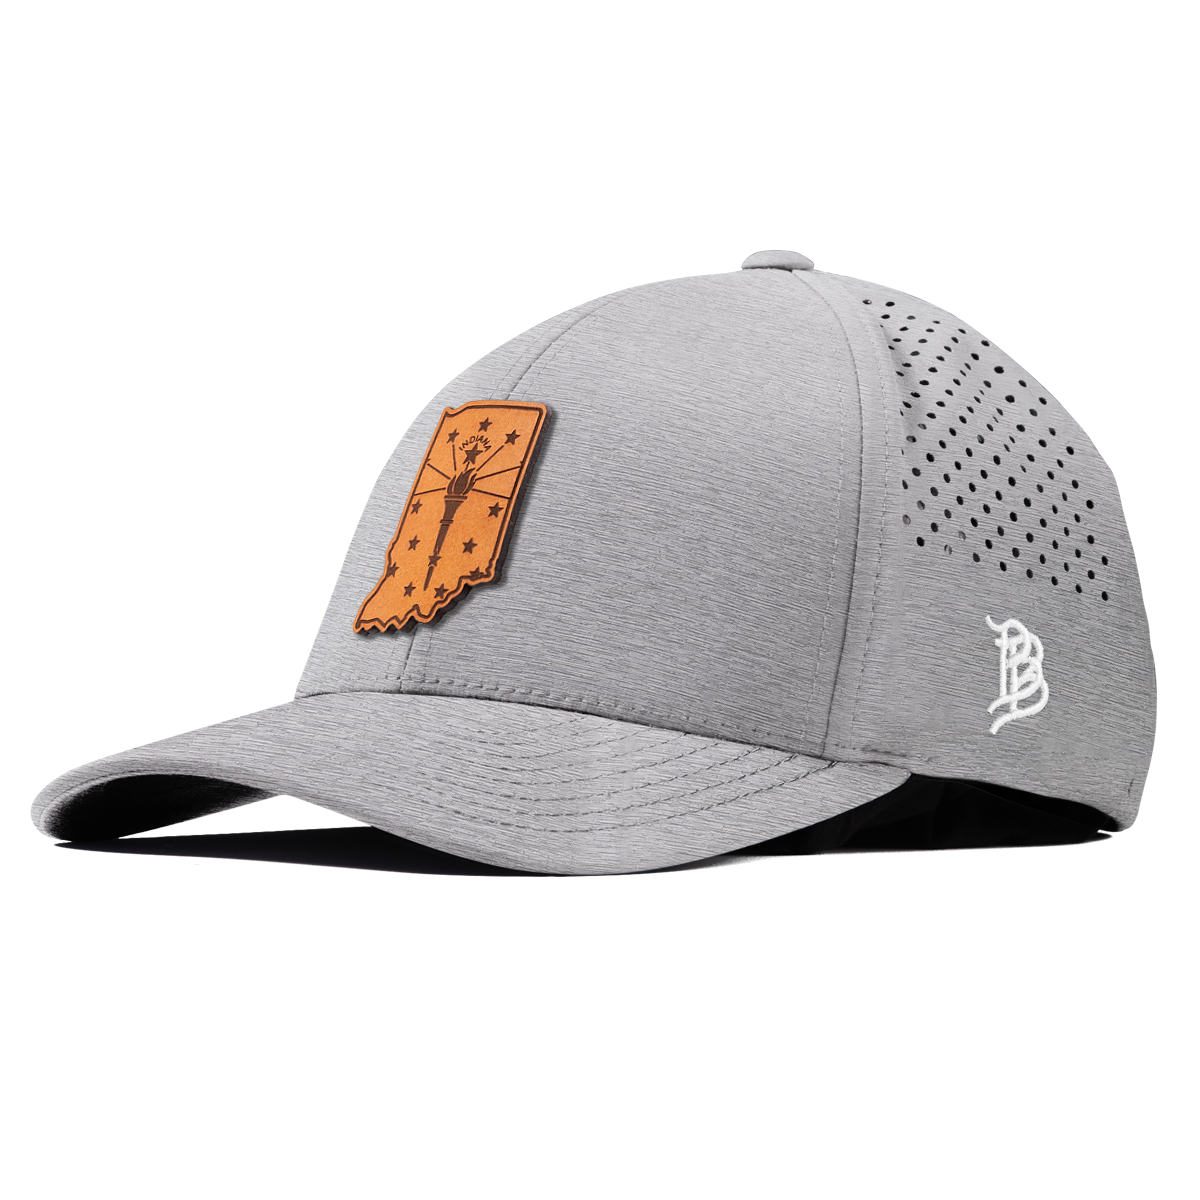 Indiana 19 Curved Performance Heather Gray